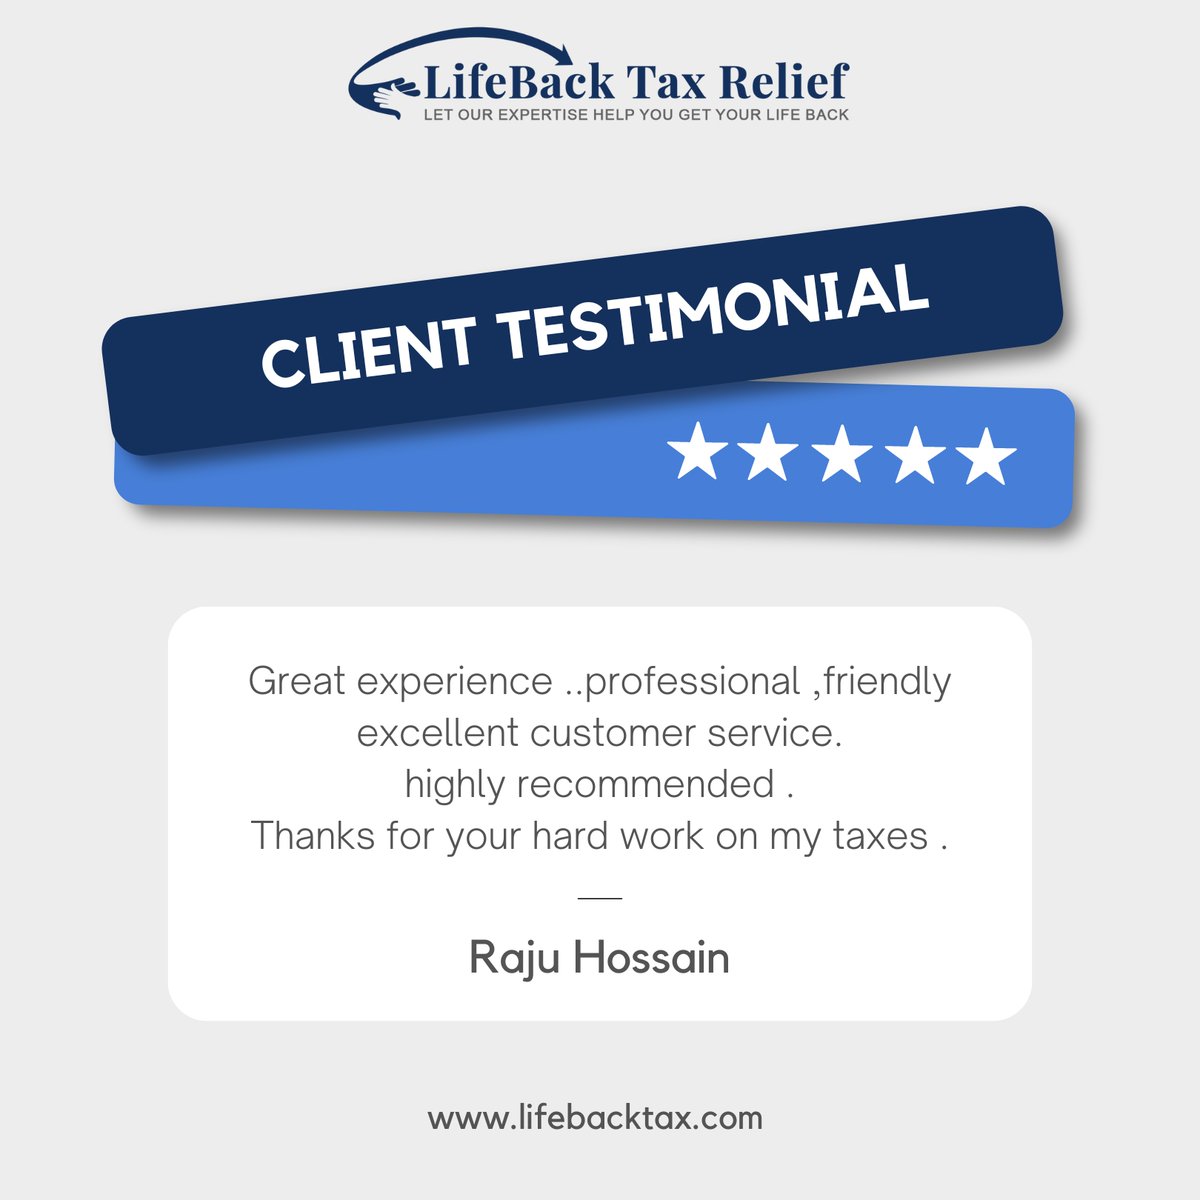 Thrilled to hear about your positive experience with our tax relief services! 🌟 Our team is dedicated to professionalism, friendliness, and excellent customer service. Thank you for trusting us with your taxes! 

#taxrelief #clienttestimonial #taxseason #taxseason #taxtips #tax